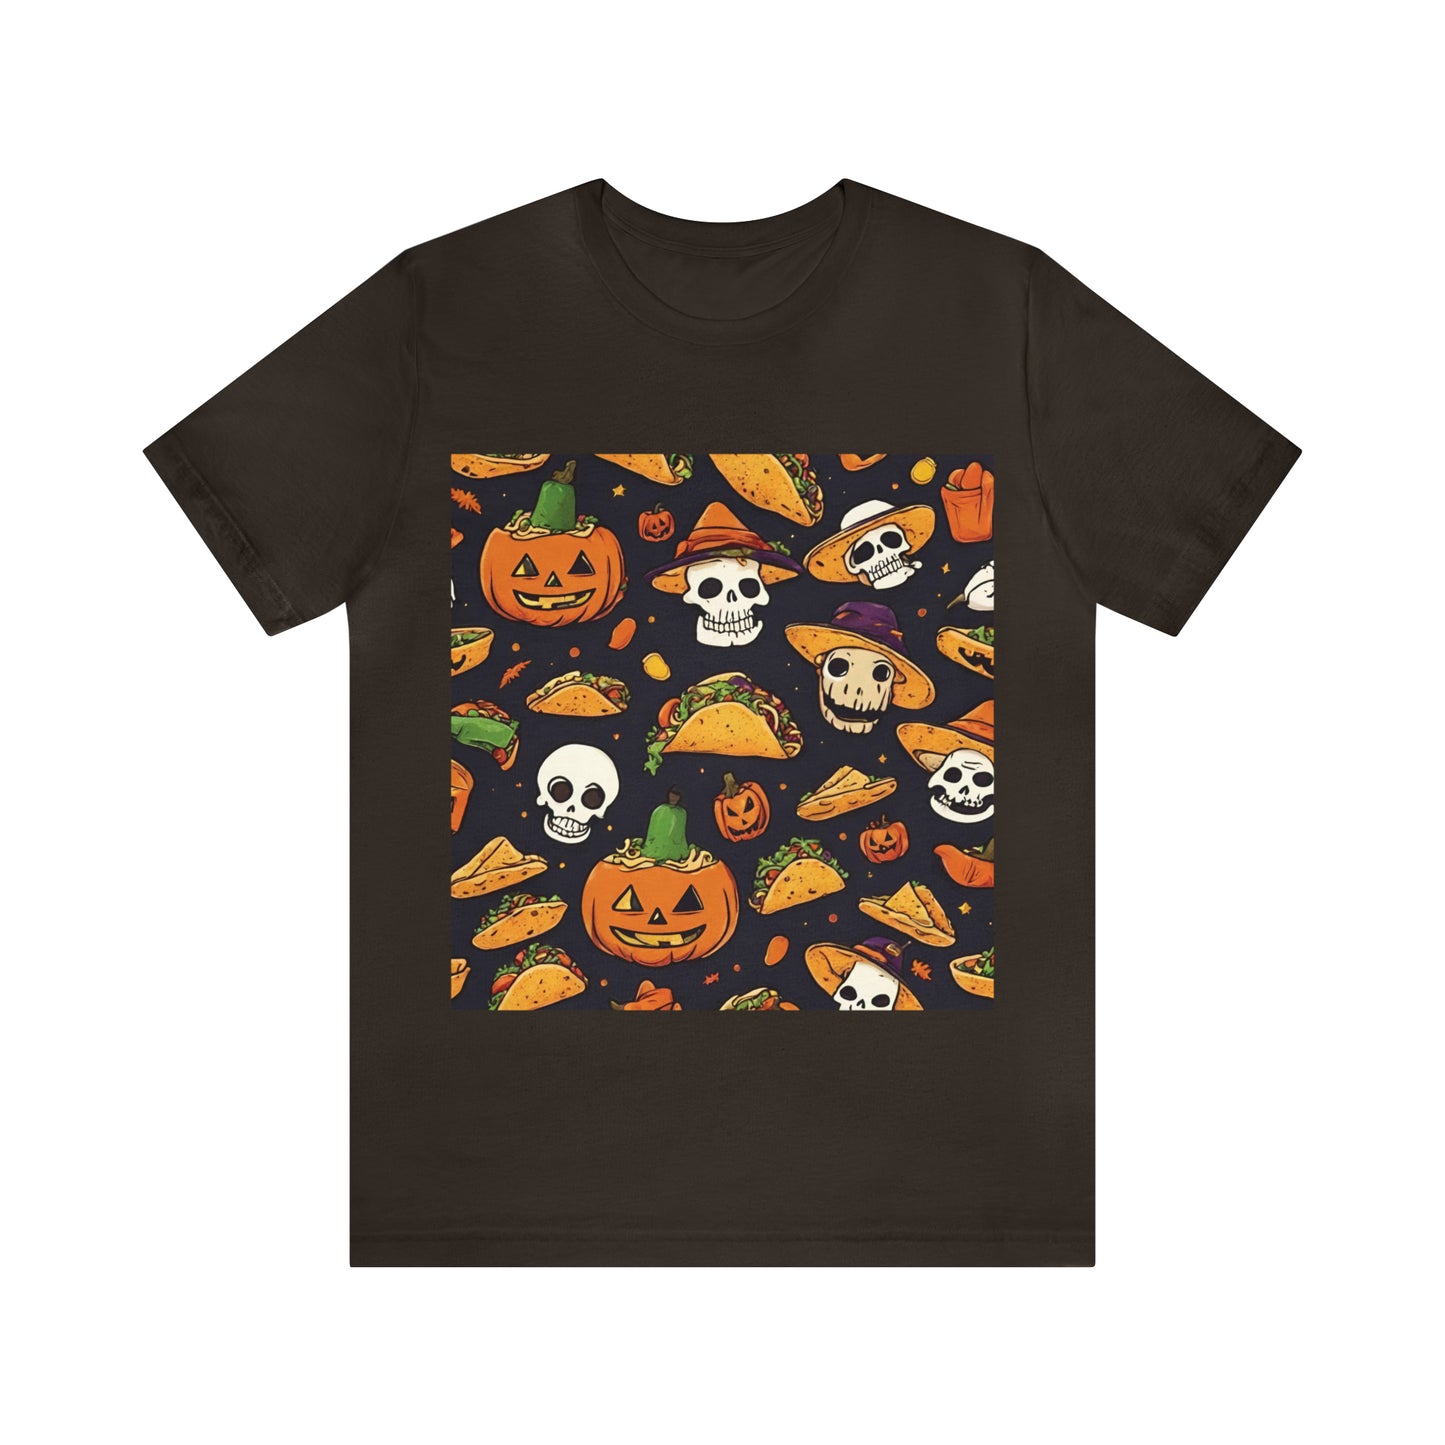 Brown T-Shirt Tshirt Design Halloween Gift for Friend and Family Short Sleeved Shirt Petrova Designs